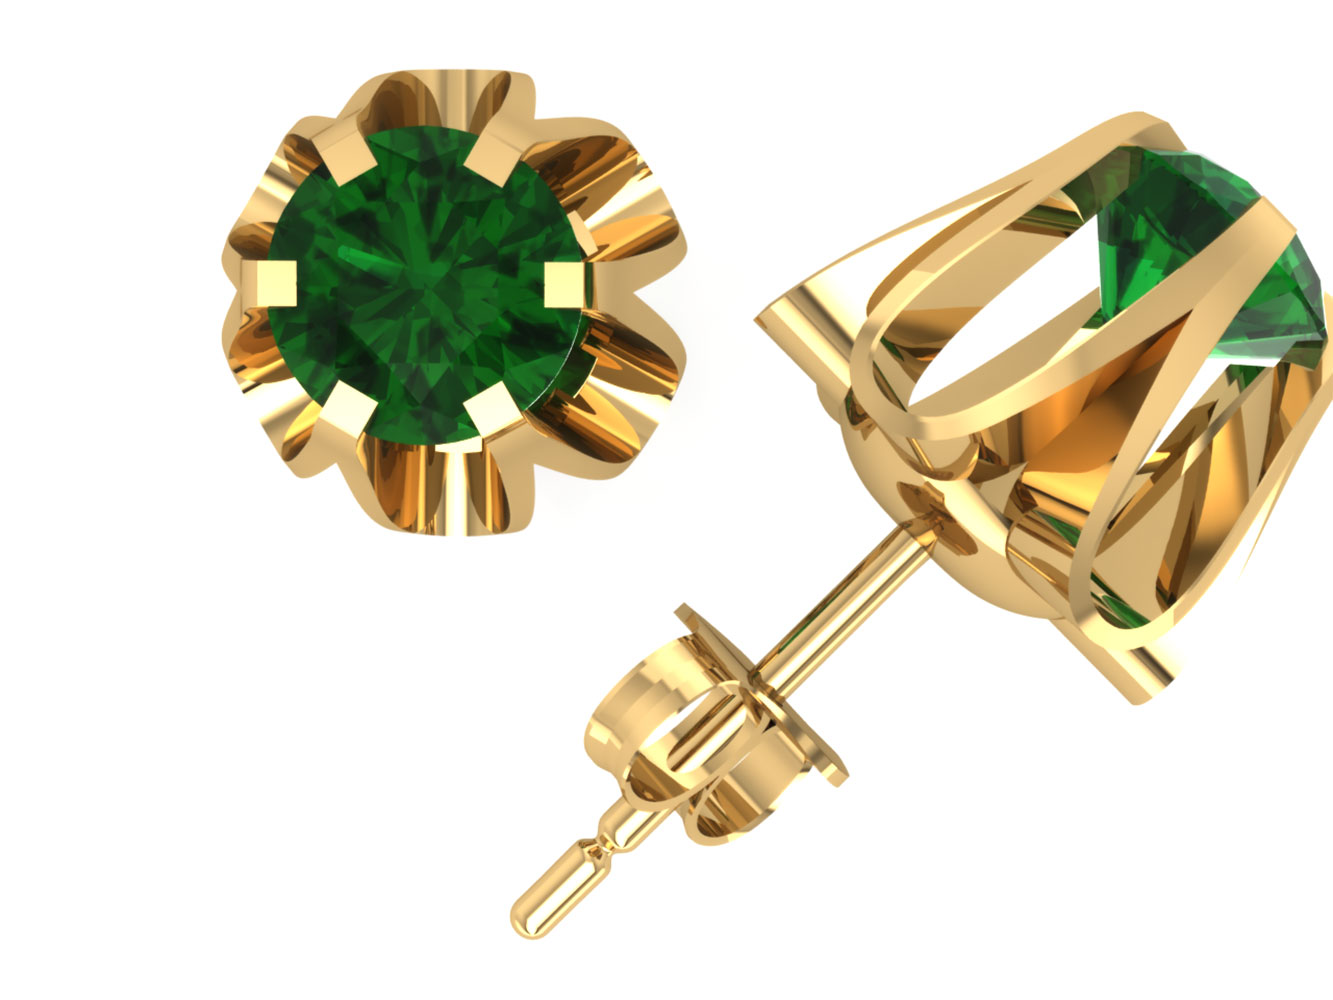 Jewel We Sell 1.00Carat Round Emerald Buttercup Stud Earrings 14k White or Yellow Gold Prong Setting AAA Quality